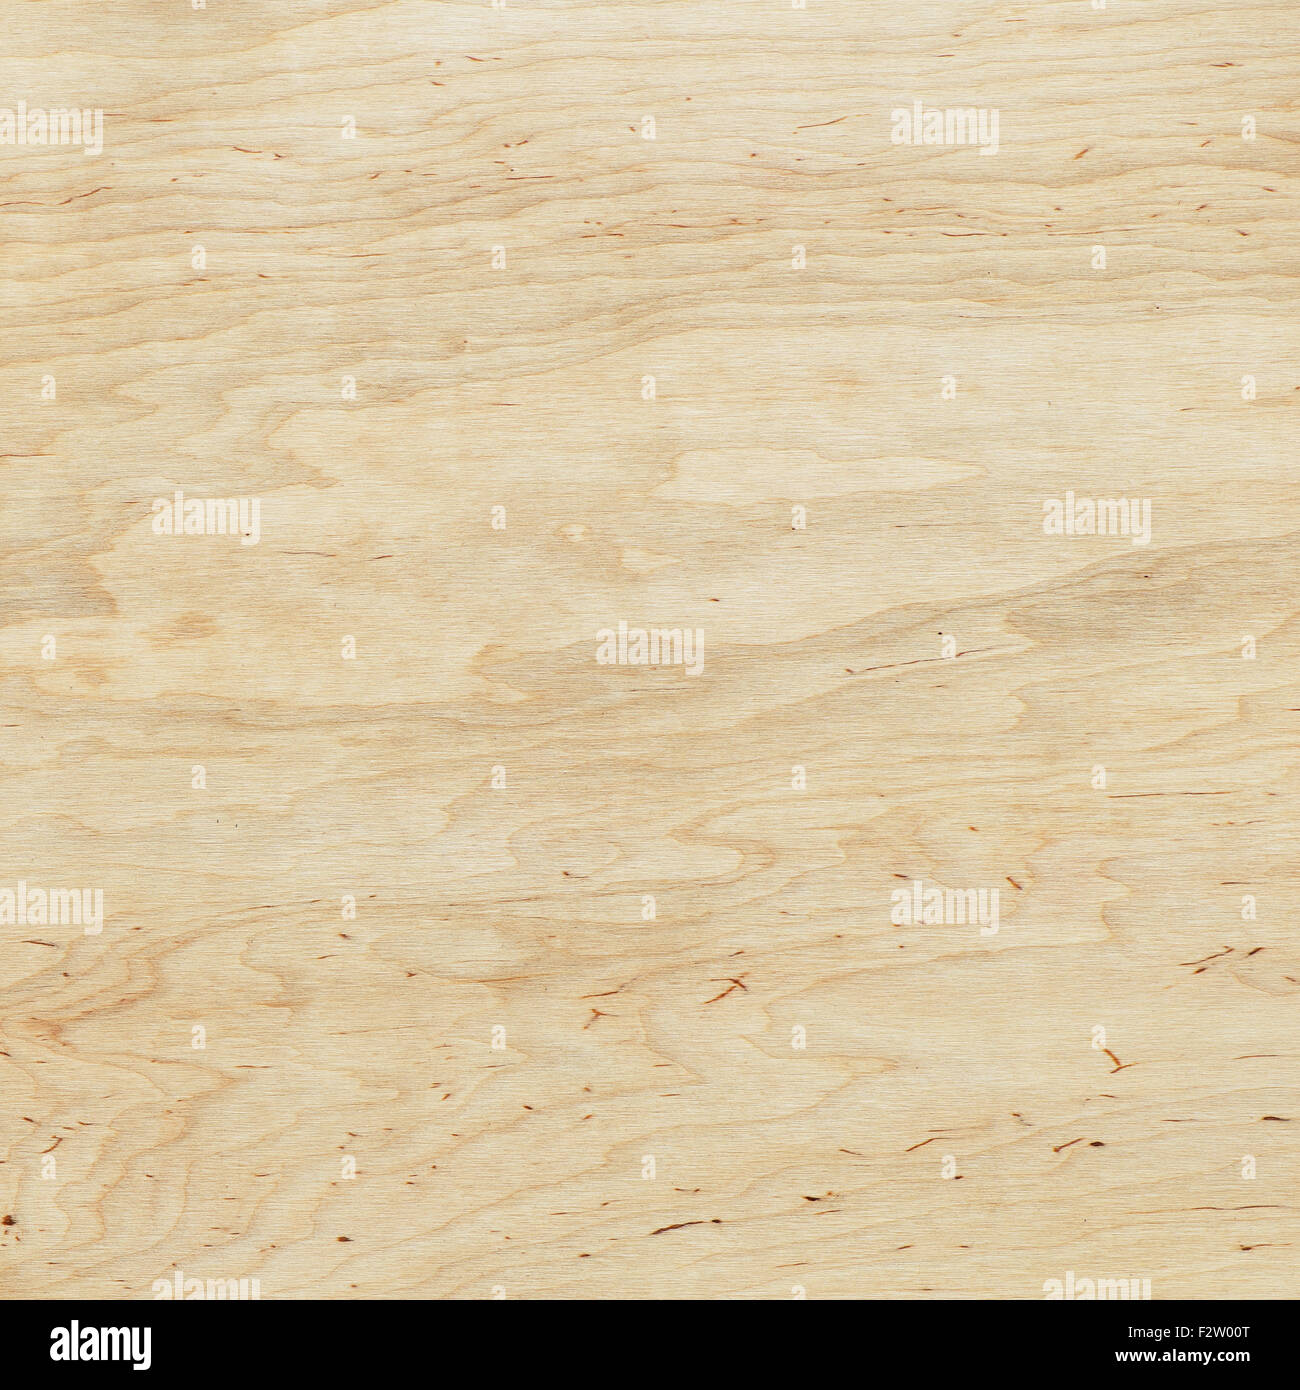 Wood texture. Rough plywood background. Stock Photo